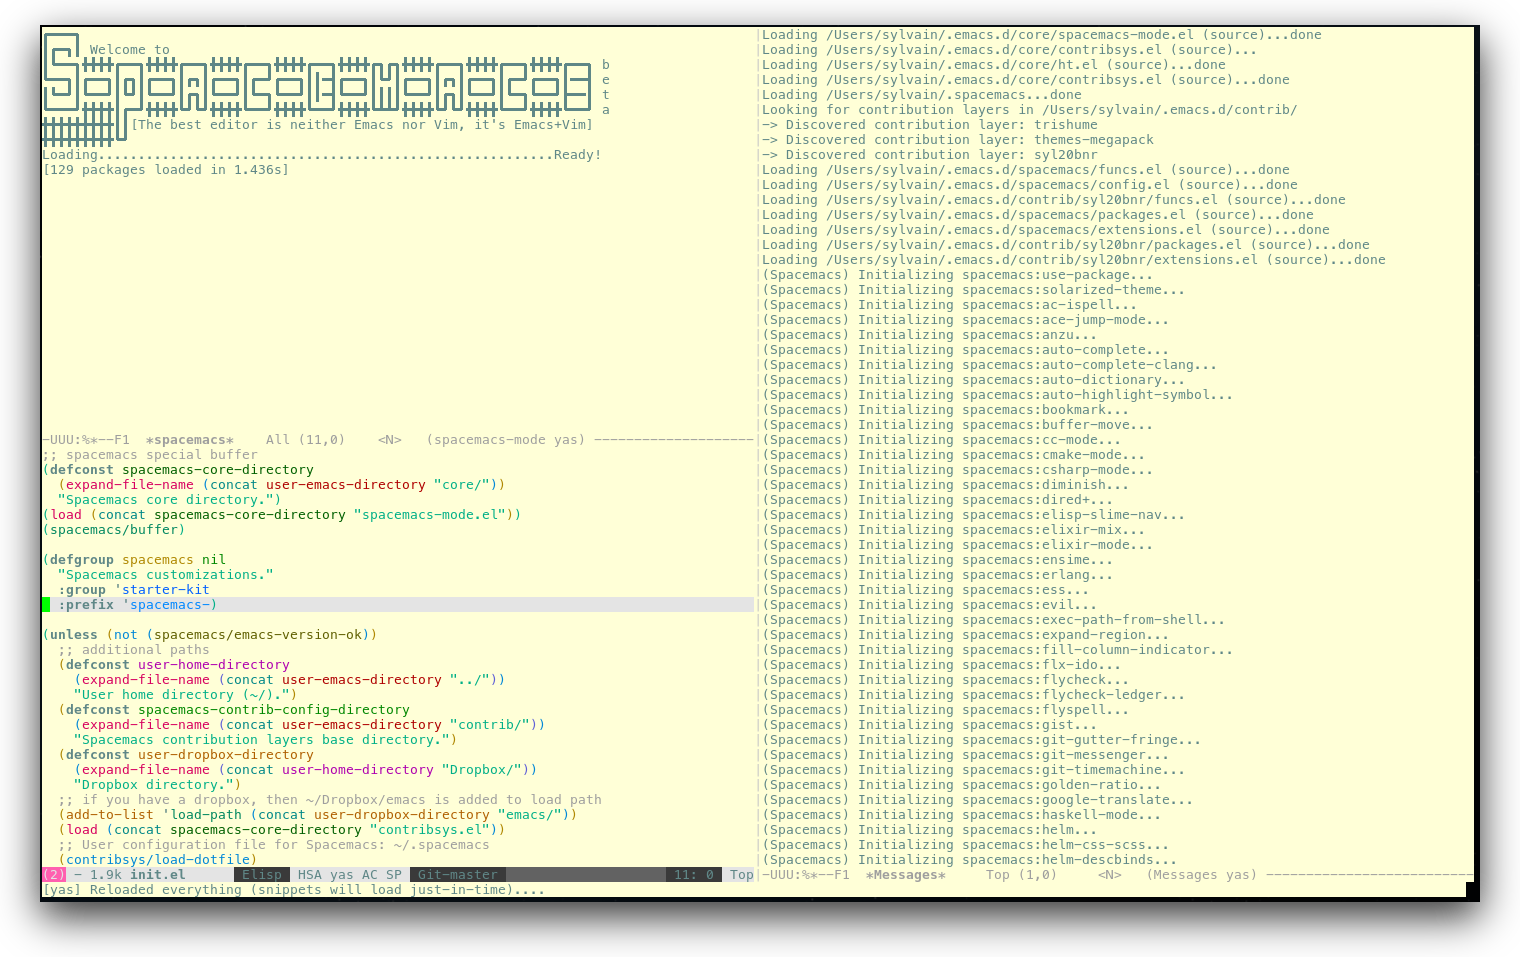 /TakeV/spacemacs/media/commit/61c97b7dda59edee607ce01df927bea5650843e4/doc/img/spacemacs-urxvt.png